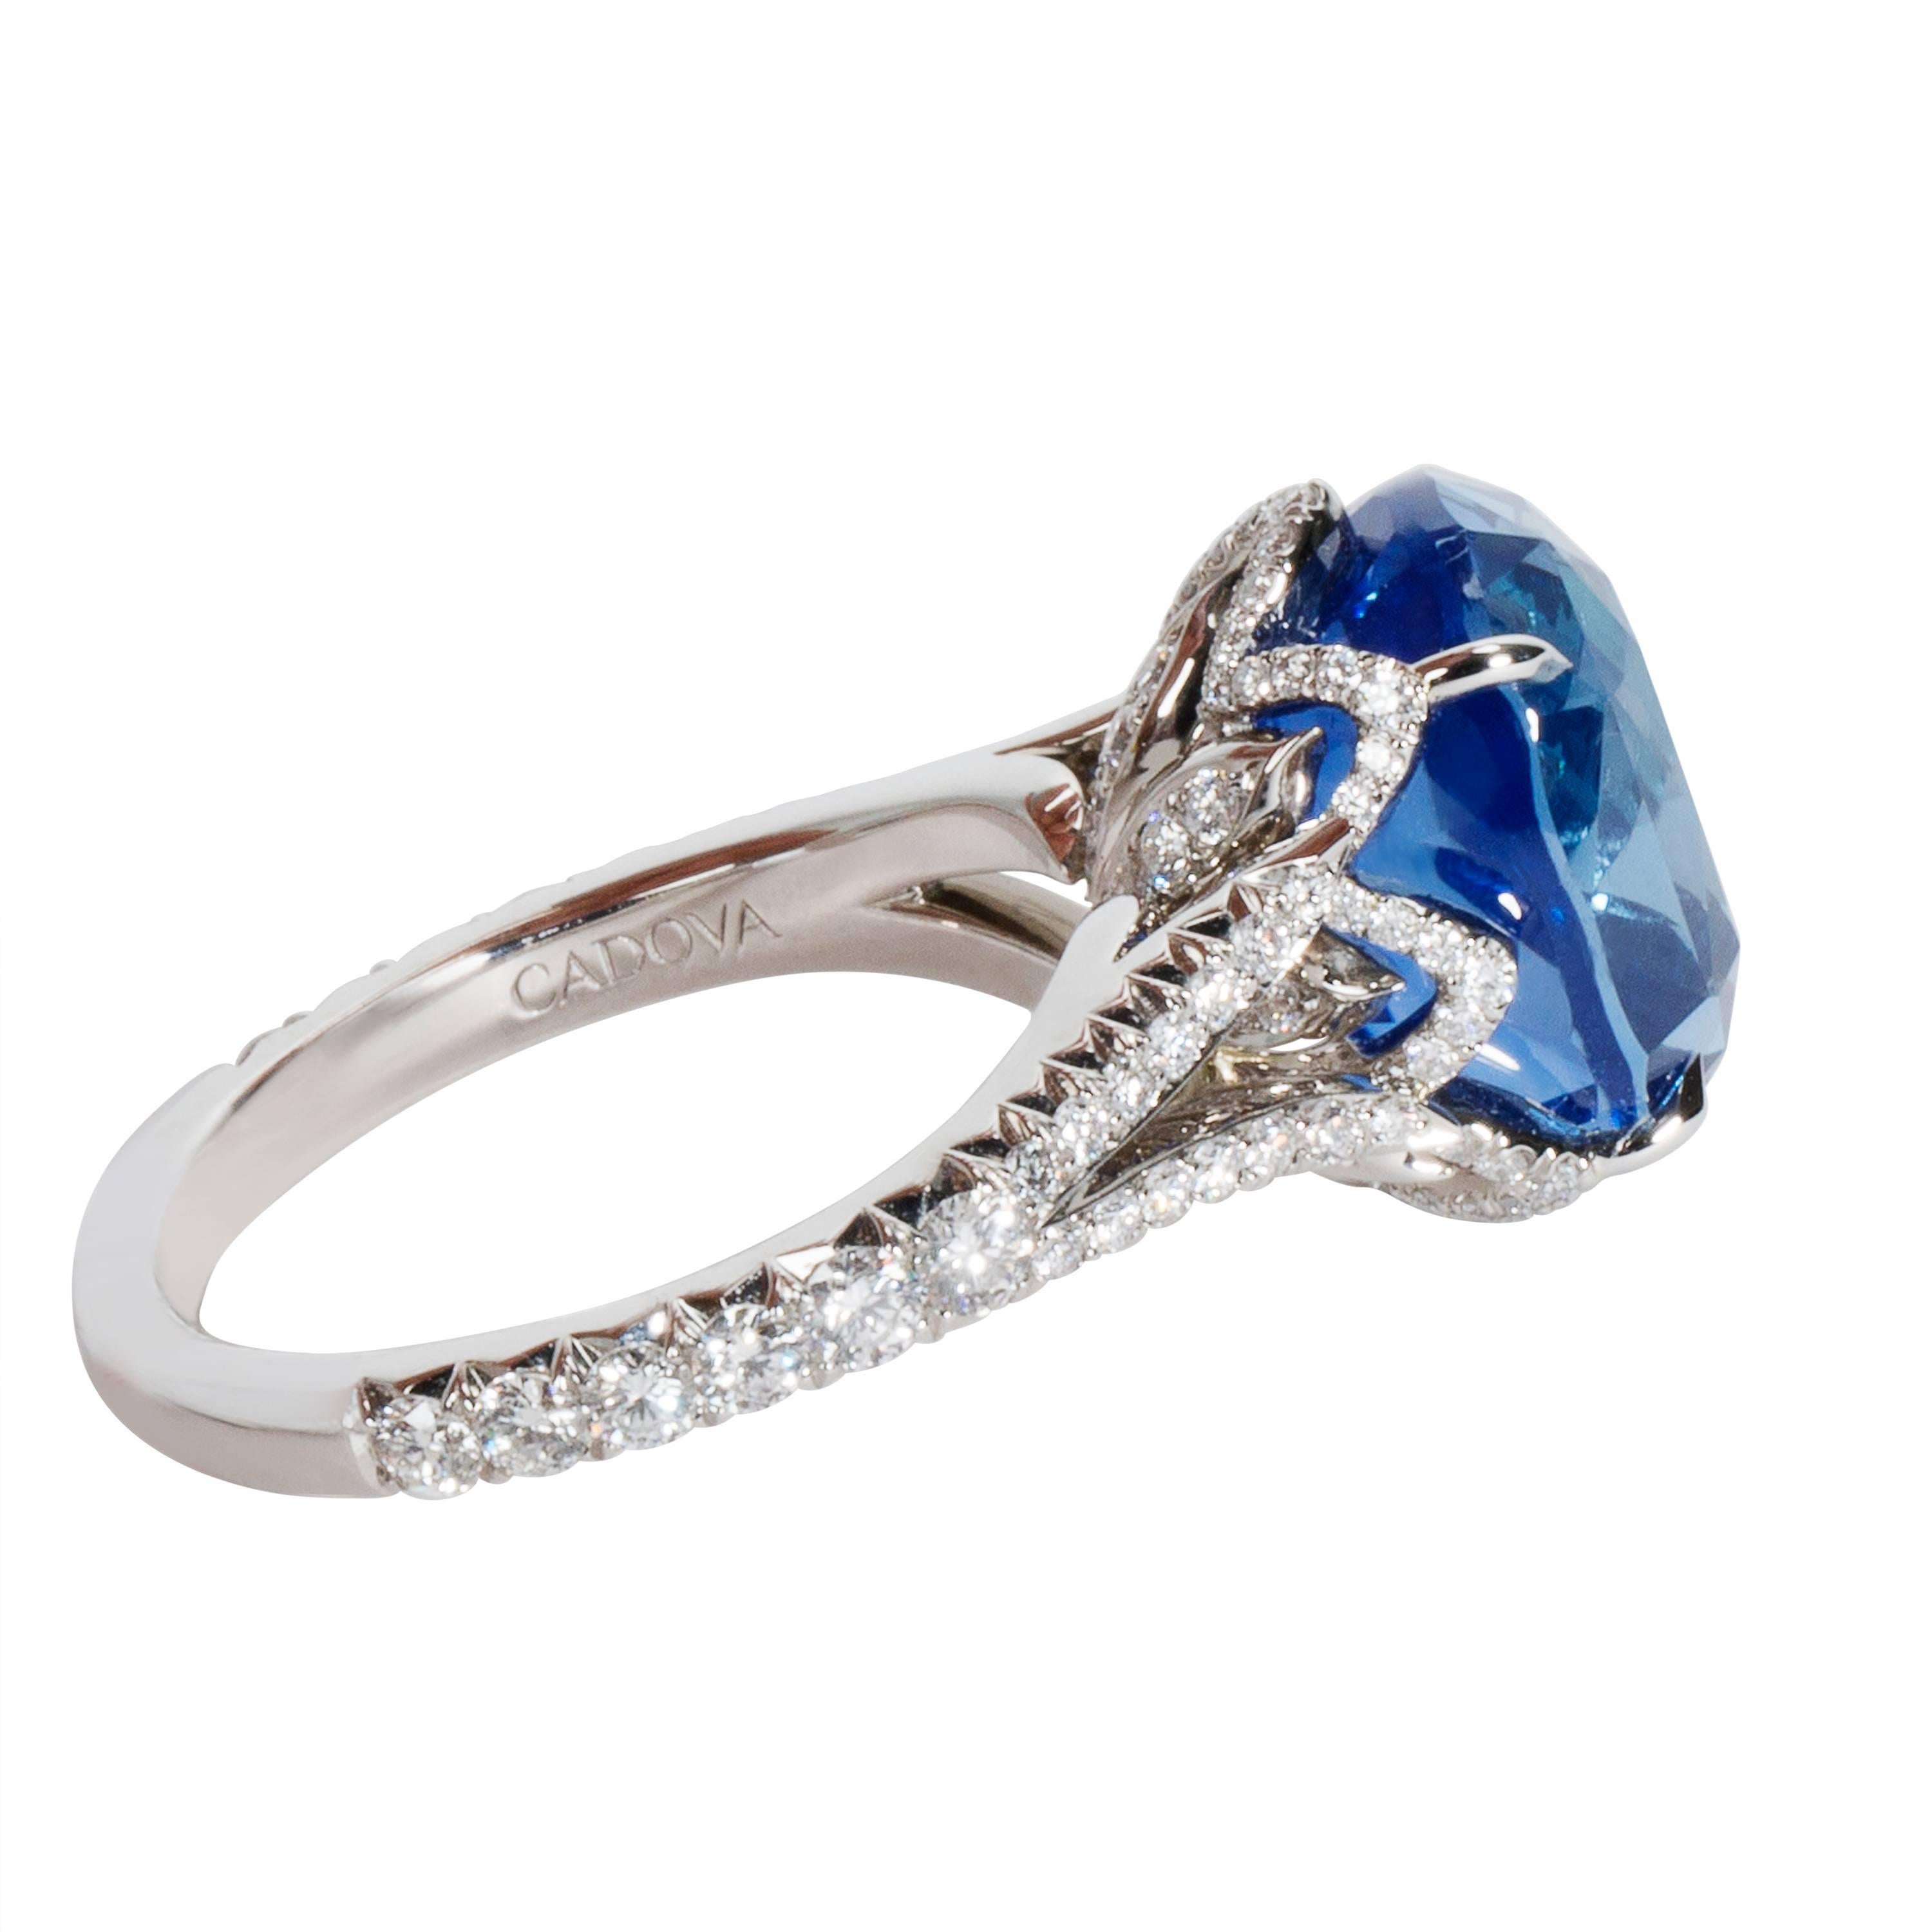 With a striking 10.43 carat unheated, Ceylon blue sapphire at its center, this ring is not only elegant, but regal. it seems even more impressive in the delicate platinum setting, with 0.92 carats of diamonds shining along its band. Ring Size is